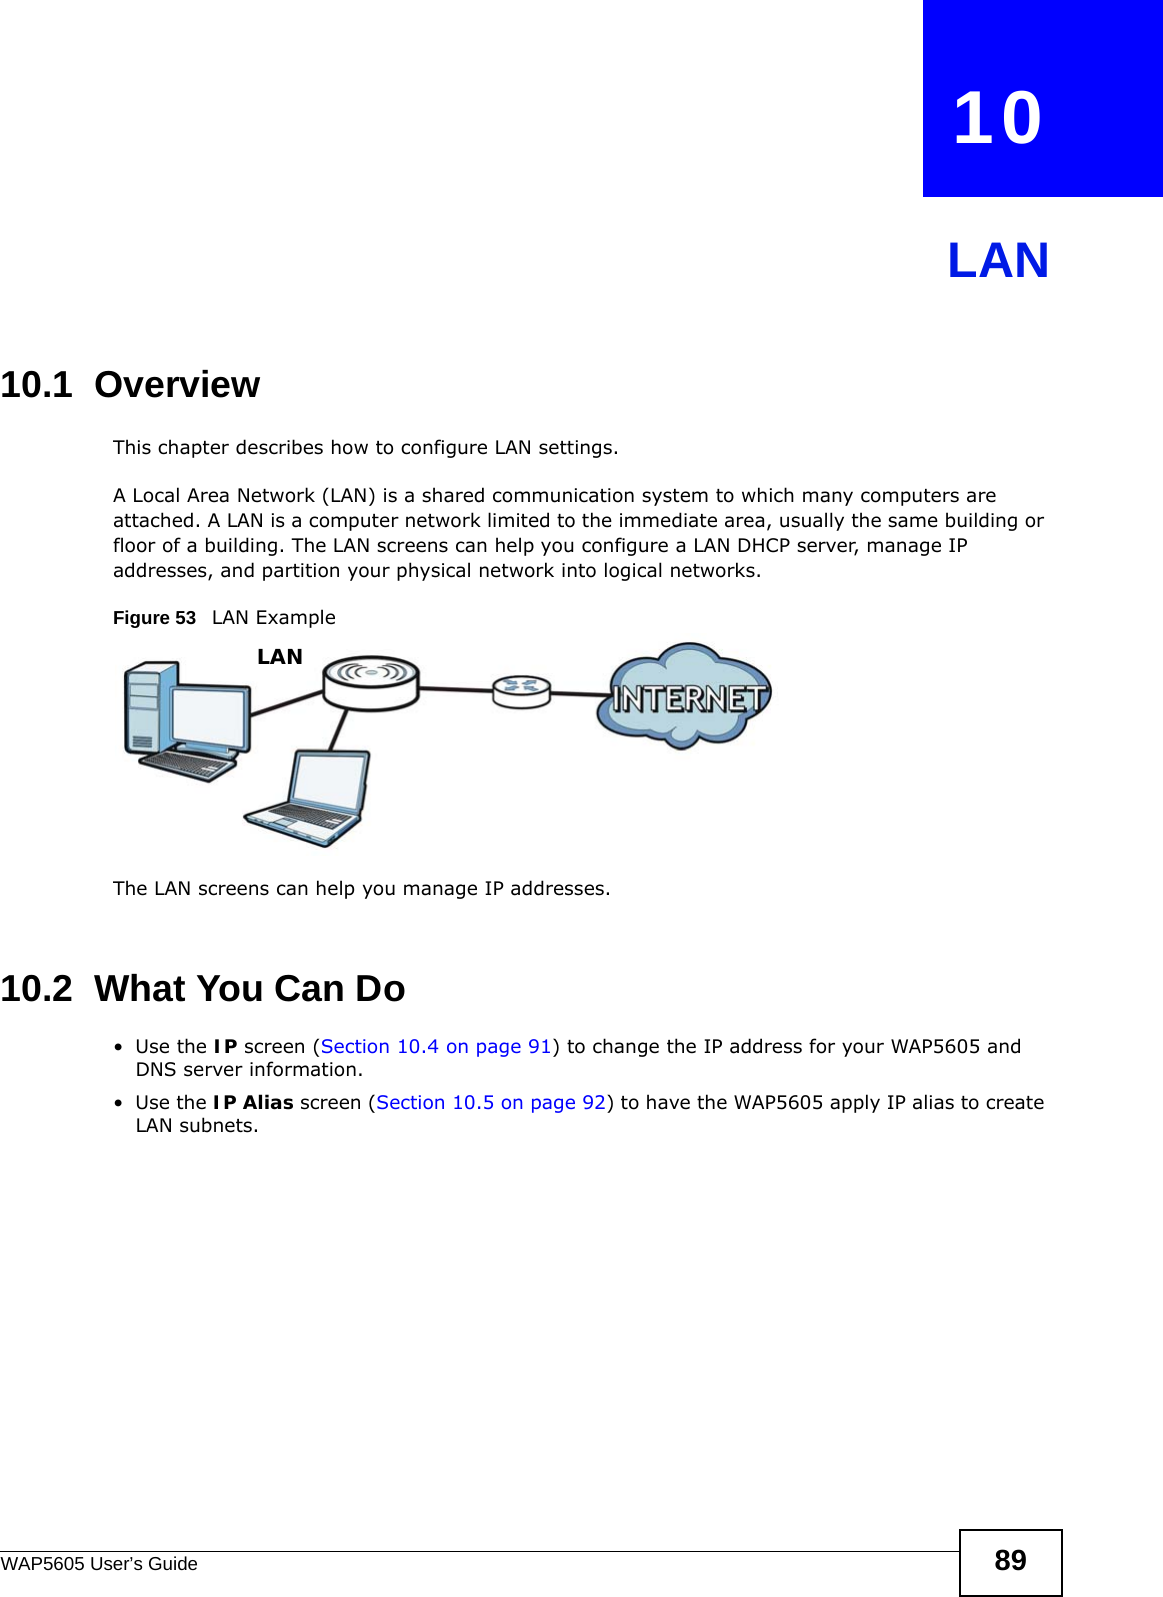 WAP5605 User’s Guide 89CHAPTER   10LAN10.1  OverviewThis chapter describes how to configure LAN settings.A Local Area Network (LAN) is a shared communication system to which many computers are attached. A LAN is a computer network limited to the immediate area, usually the same building or floor of a building. The LAN screens can help you configure a LAN DHCP server, manage IP addresses, and partition your physical network into logical networks.Figure 53   LAN ExampleThe LAN screens can help you manage IP addresses.10.2  What You Can Do•Use the IP screen (Section 10.4 on page 91) to change the IP address for your WAP5605 and DNS server information.•Use the IP Alias screen (Section 10.5 on page 92) to have the WAP5605 apply IP alias to create LAN subnets.LAN